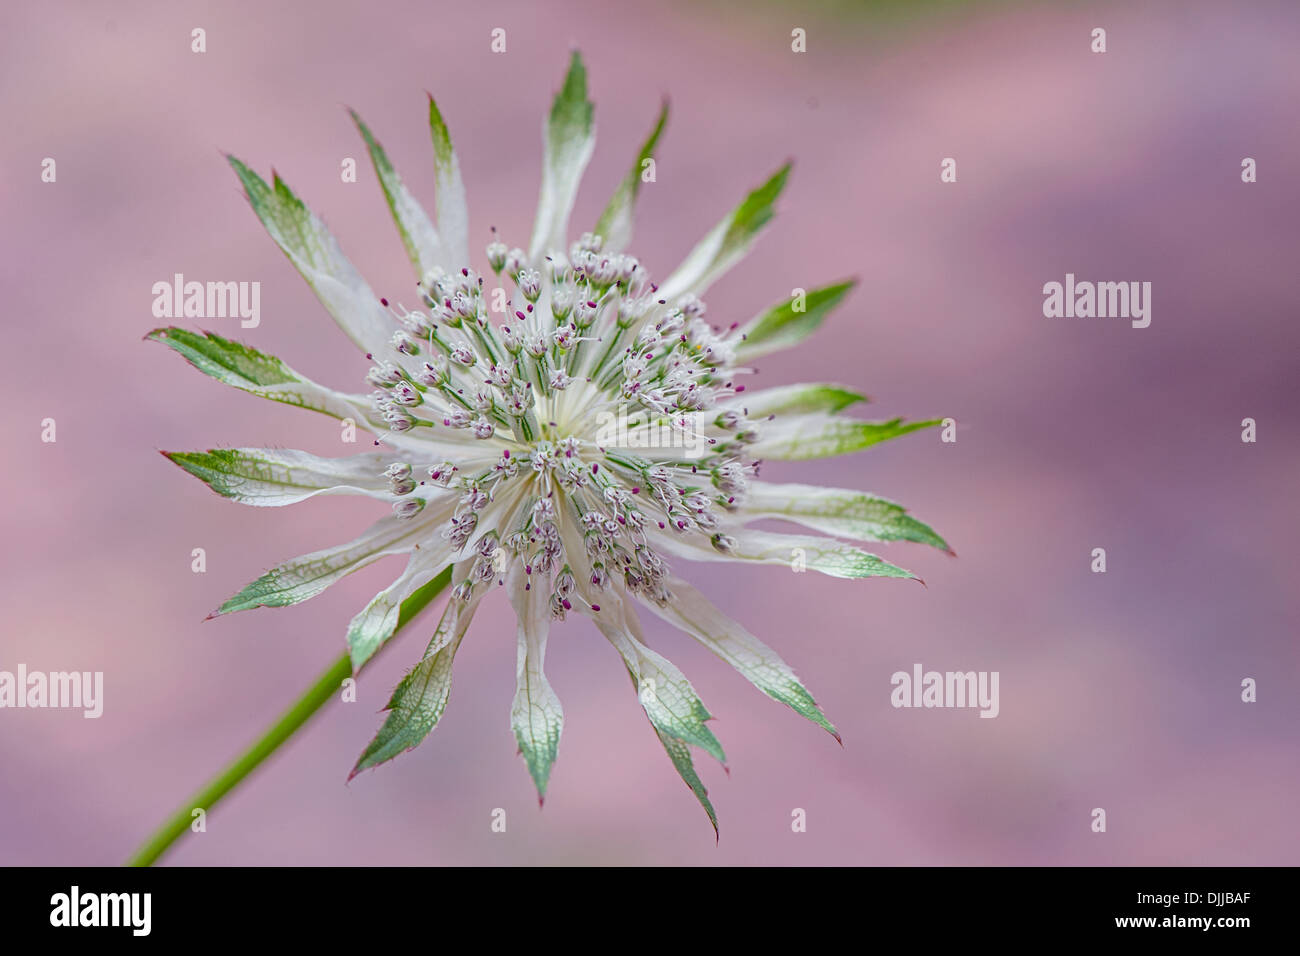 Close-up image of a single white/pink Astrantia major flower commonly known as Masterwort, image taken against a soft background Stock Photo